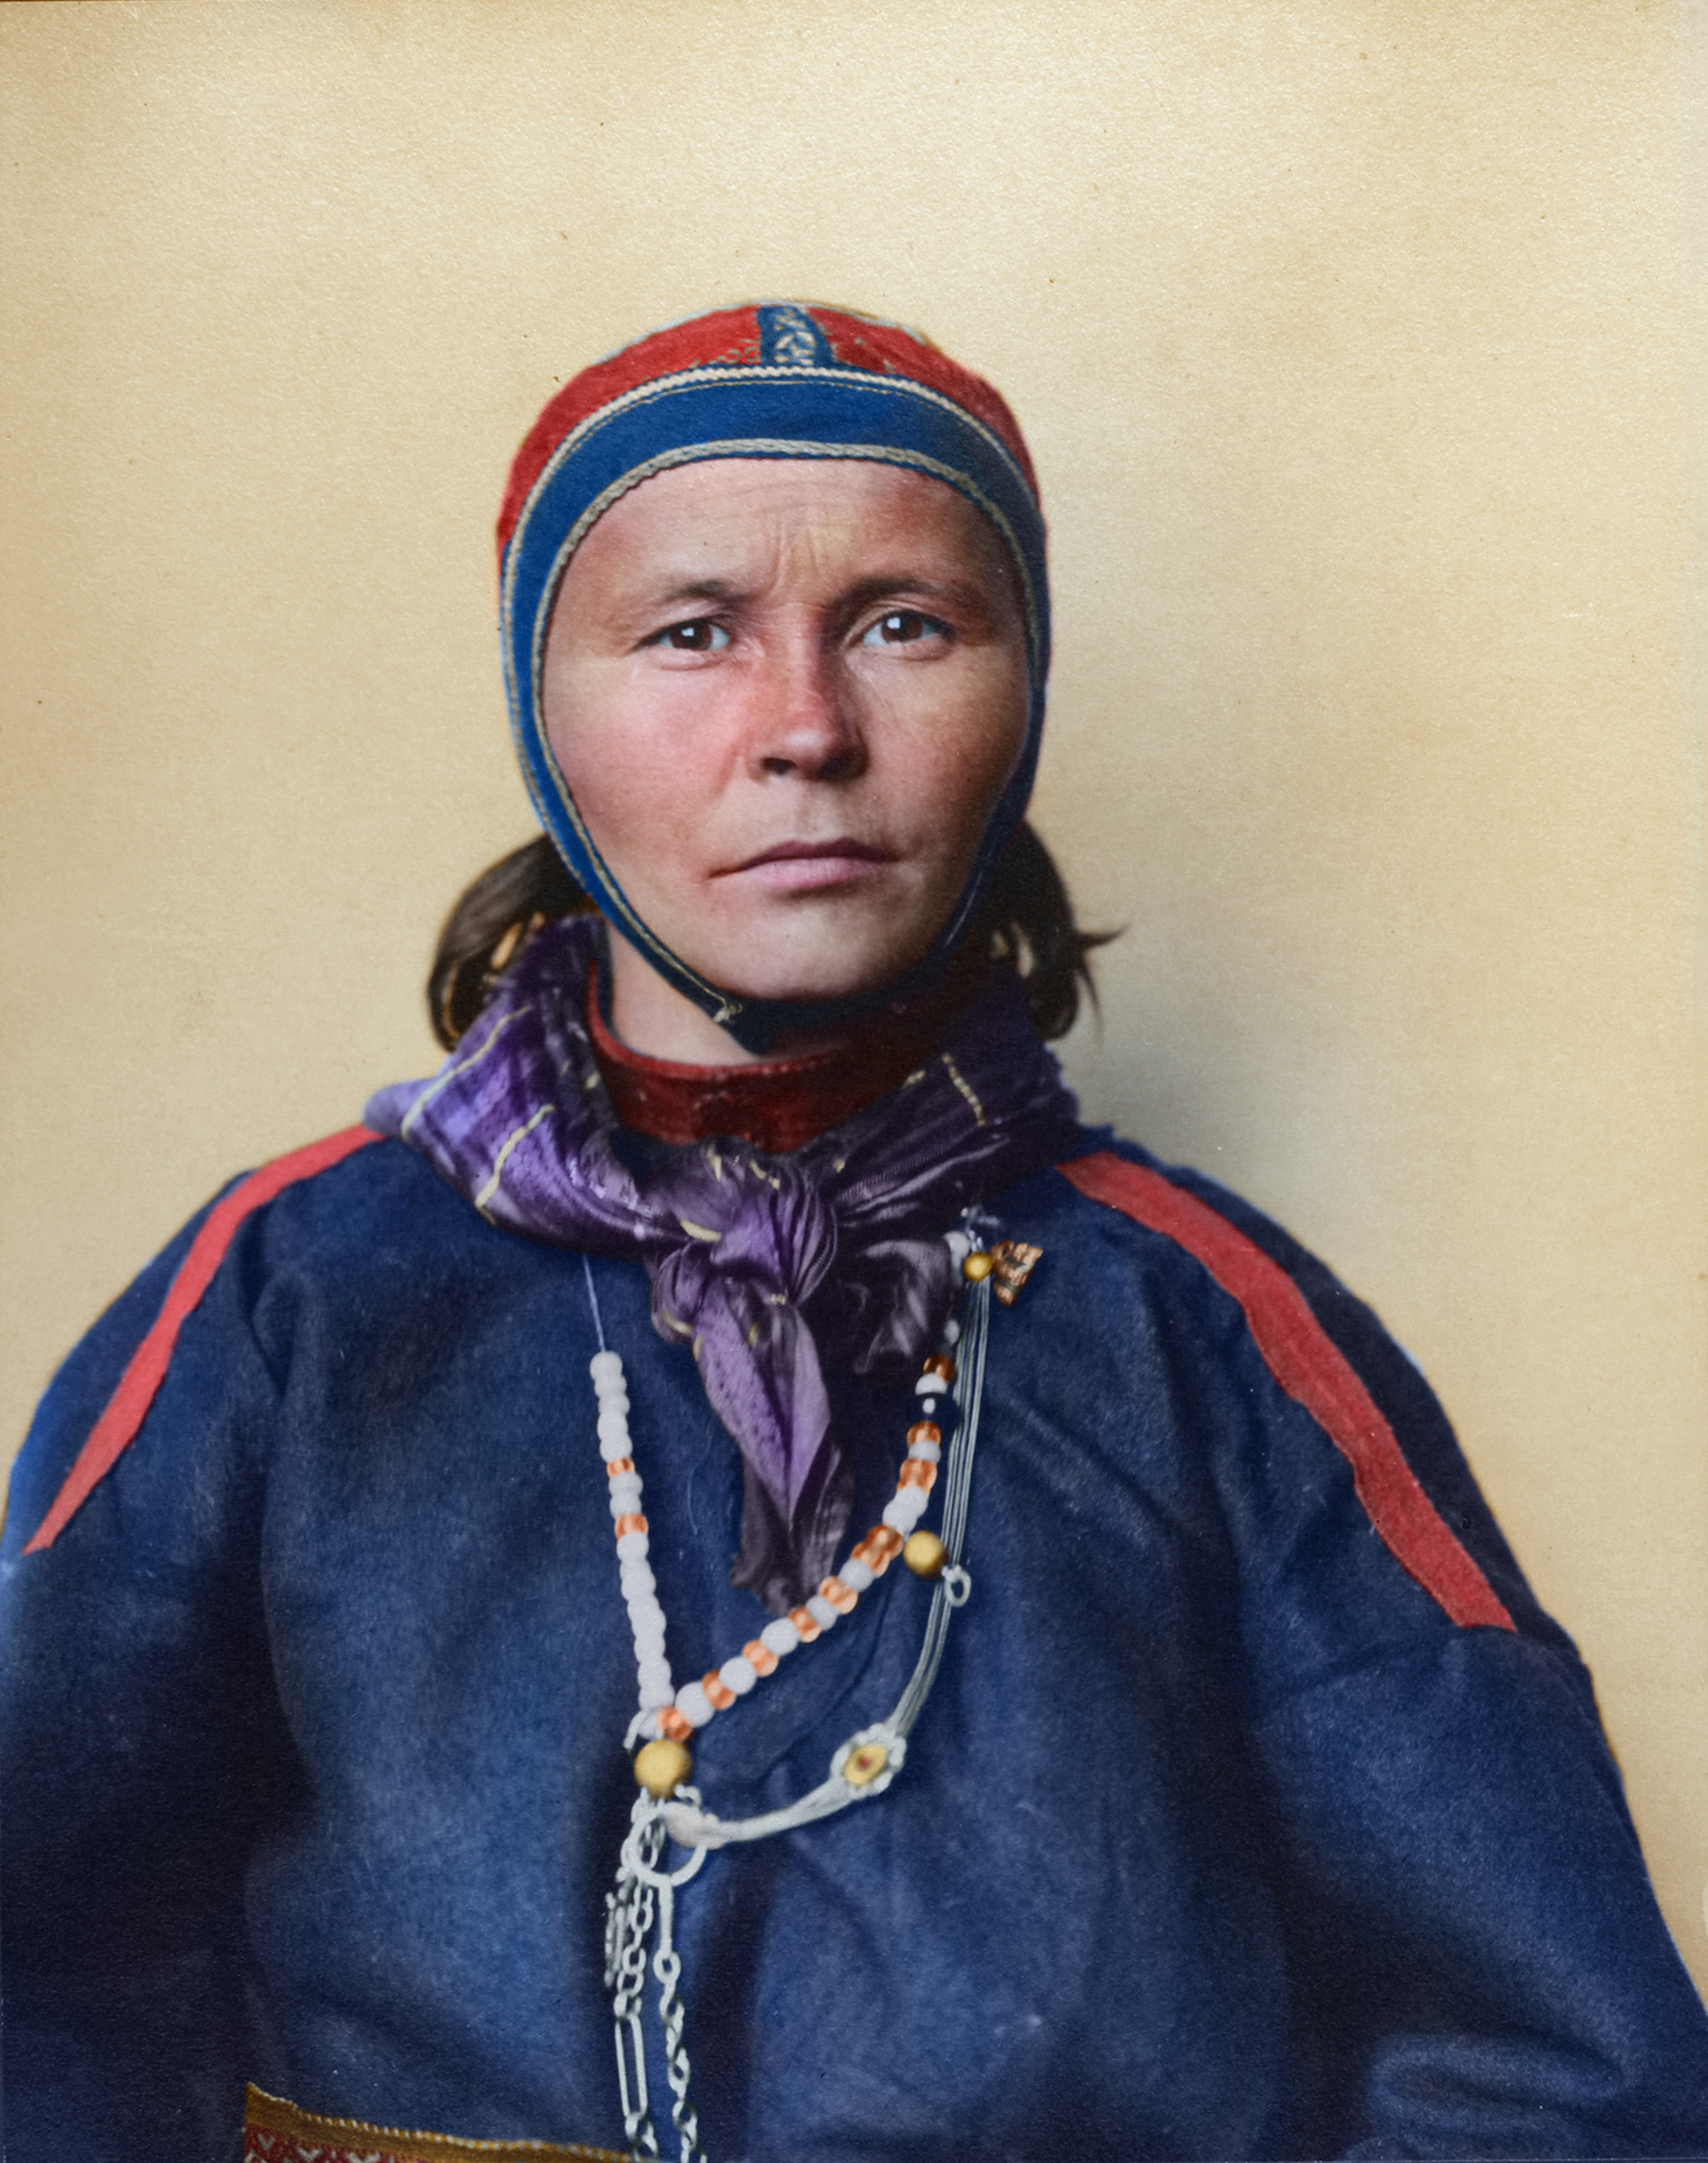 Portrait of a Laplander woman from Finland at the Ellis Island Immigration Station, circa 1905.